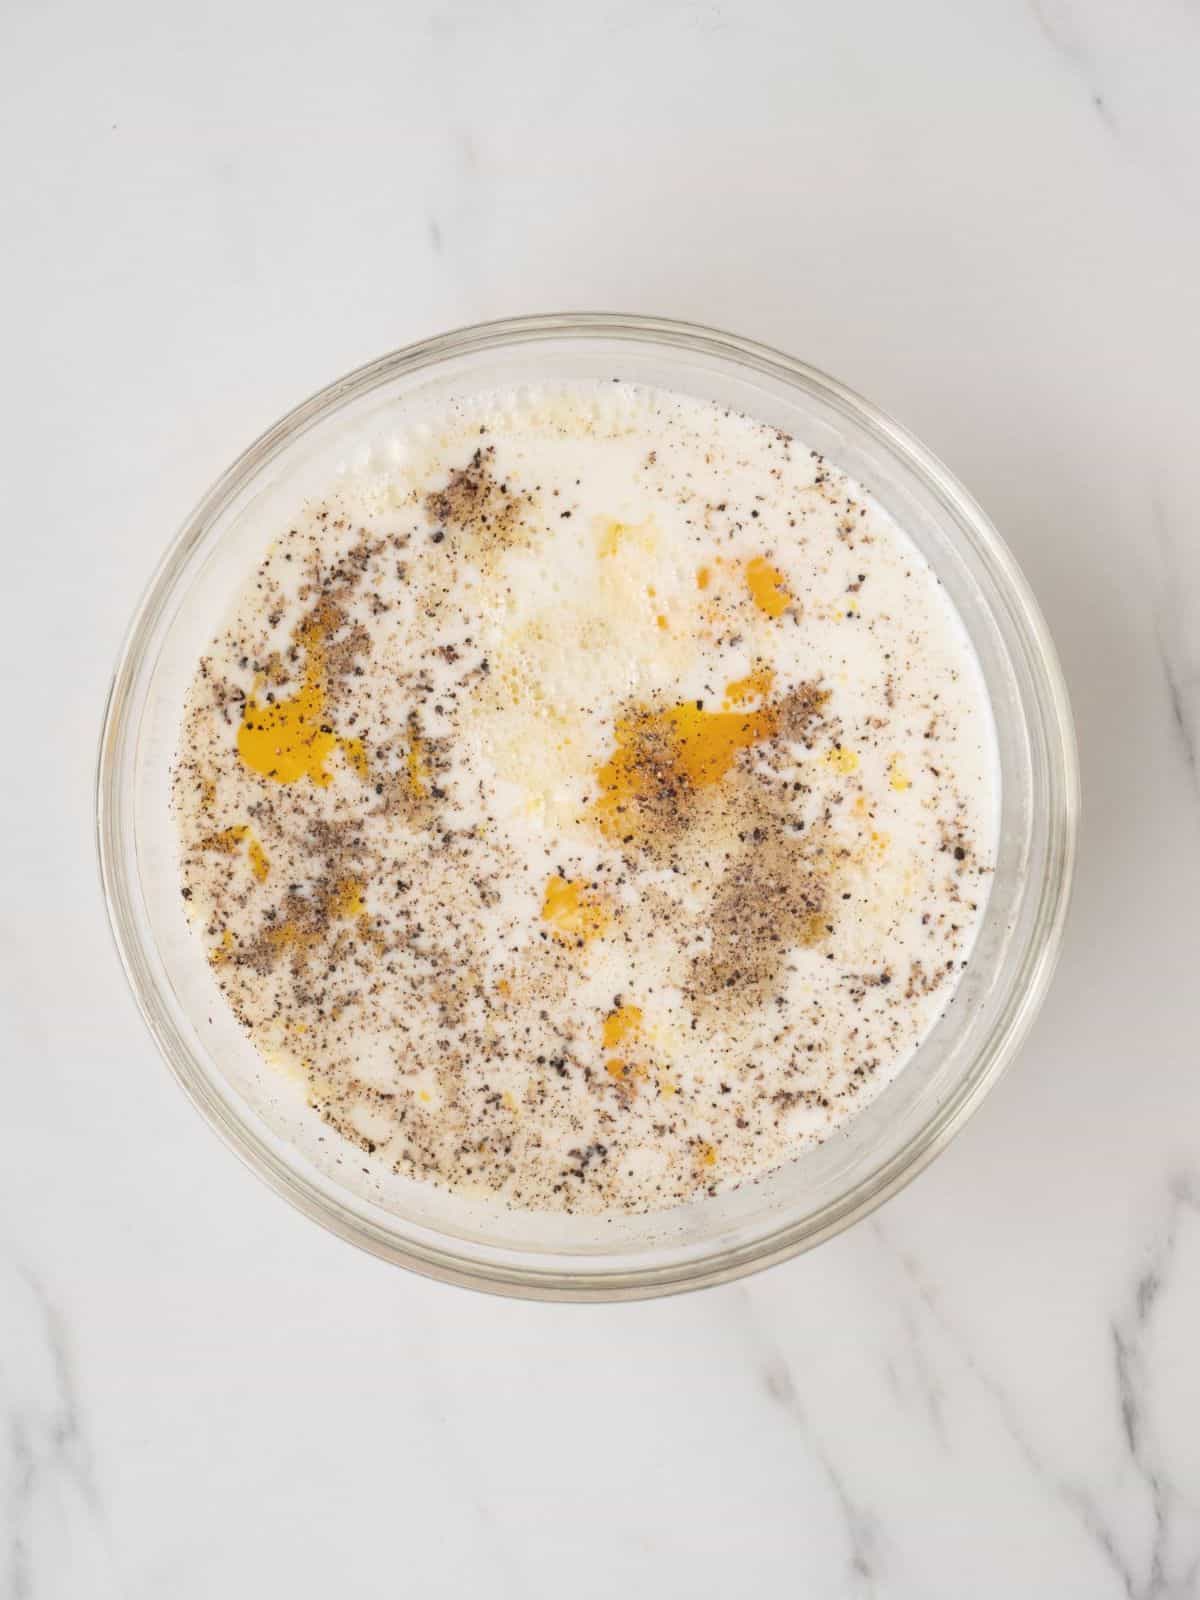 A glass mixing bowl with eggs, milk, salt and pepper mixed together.